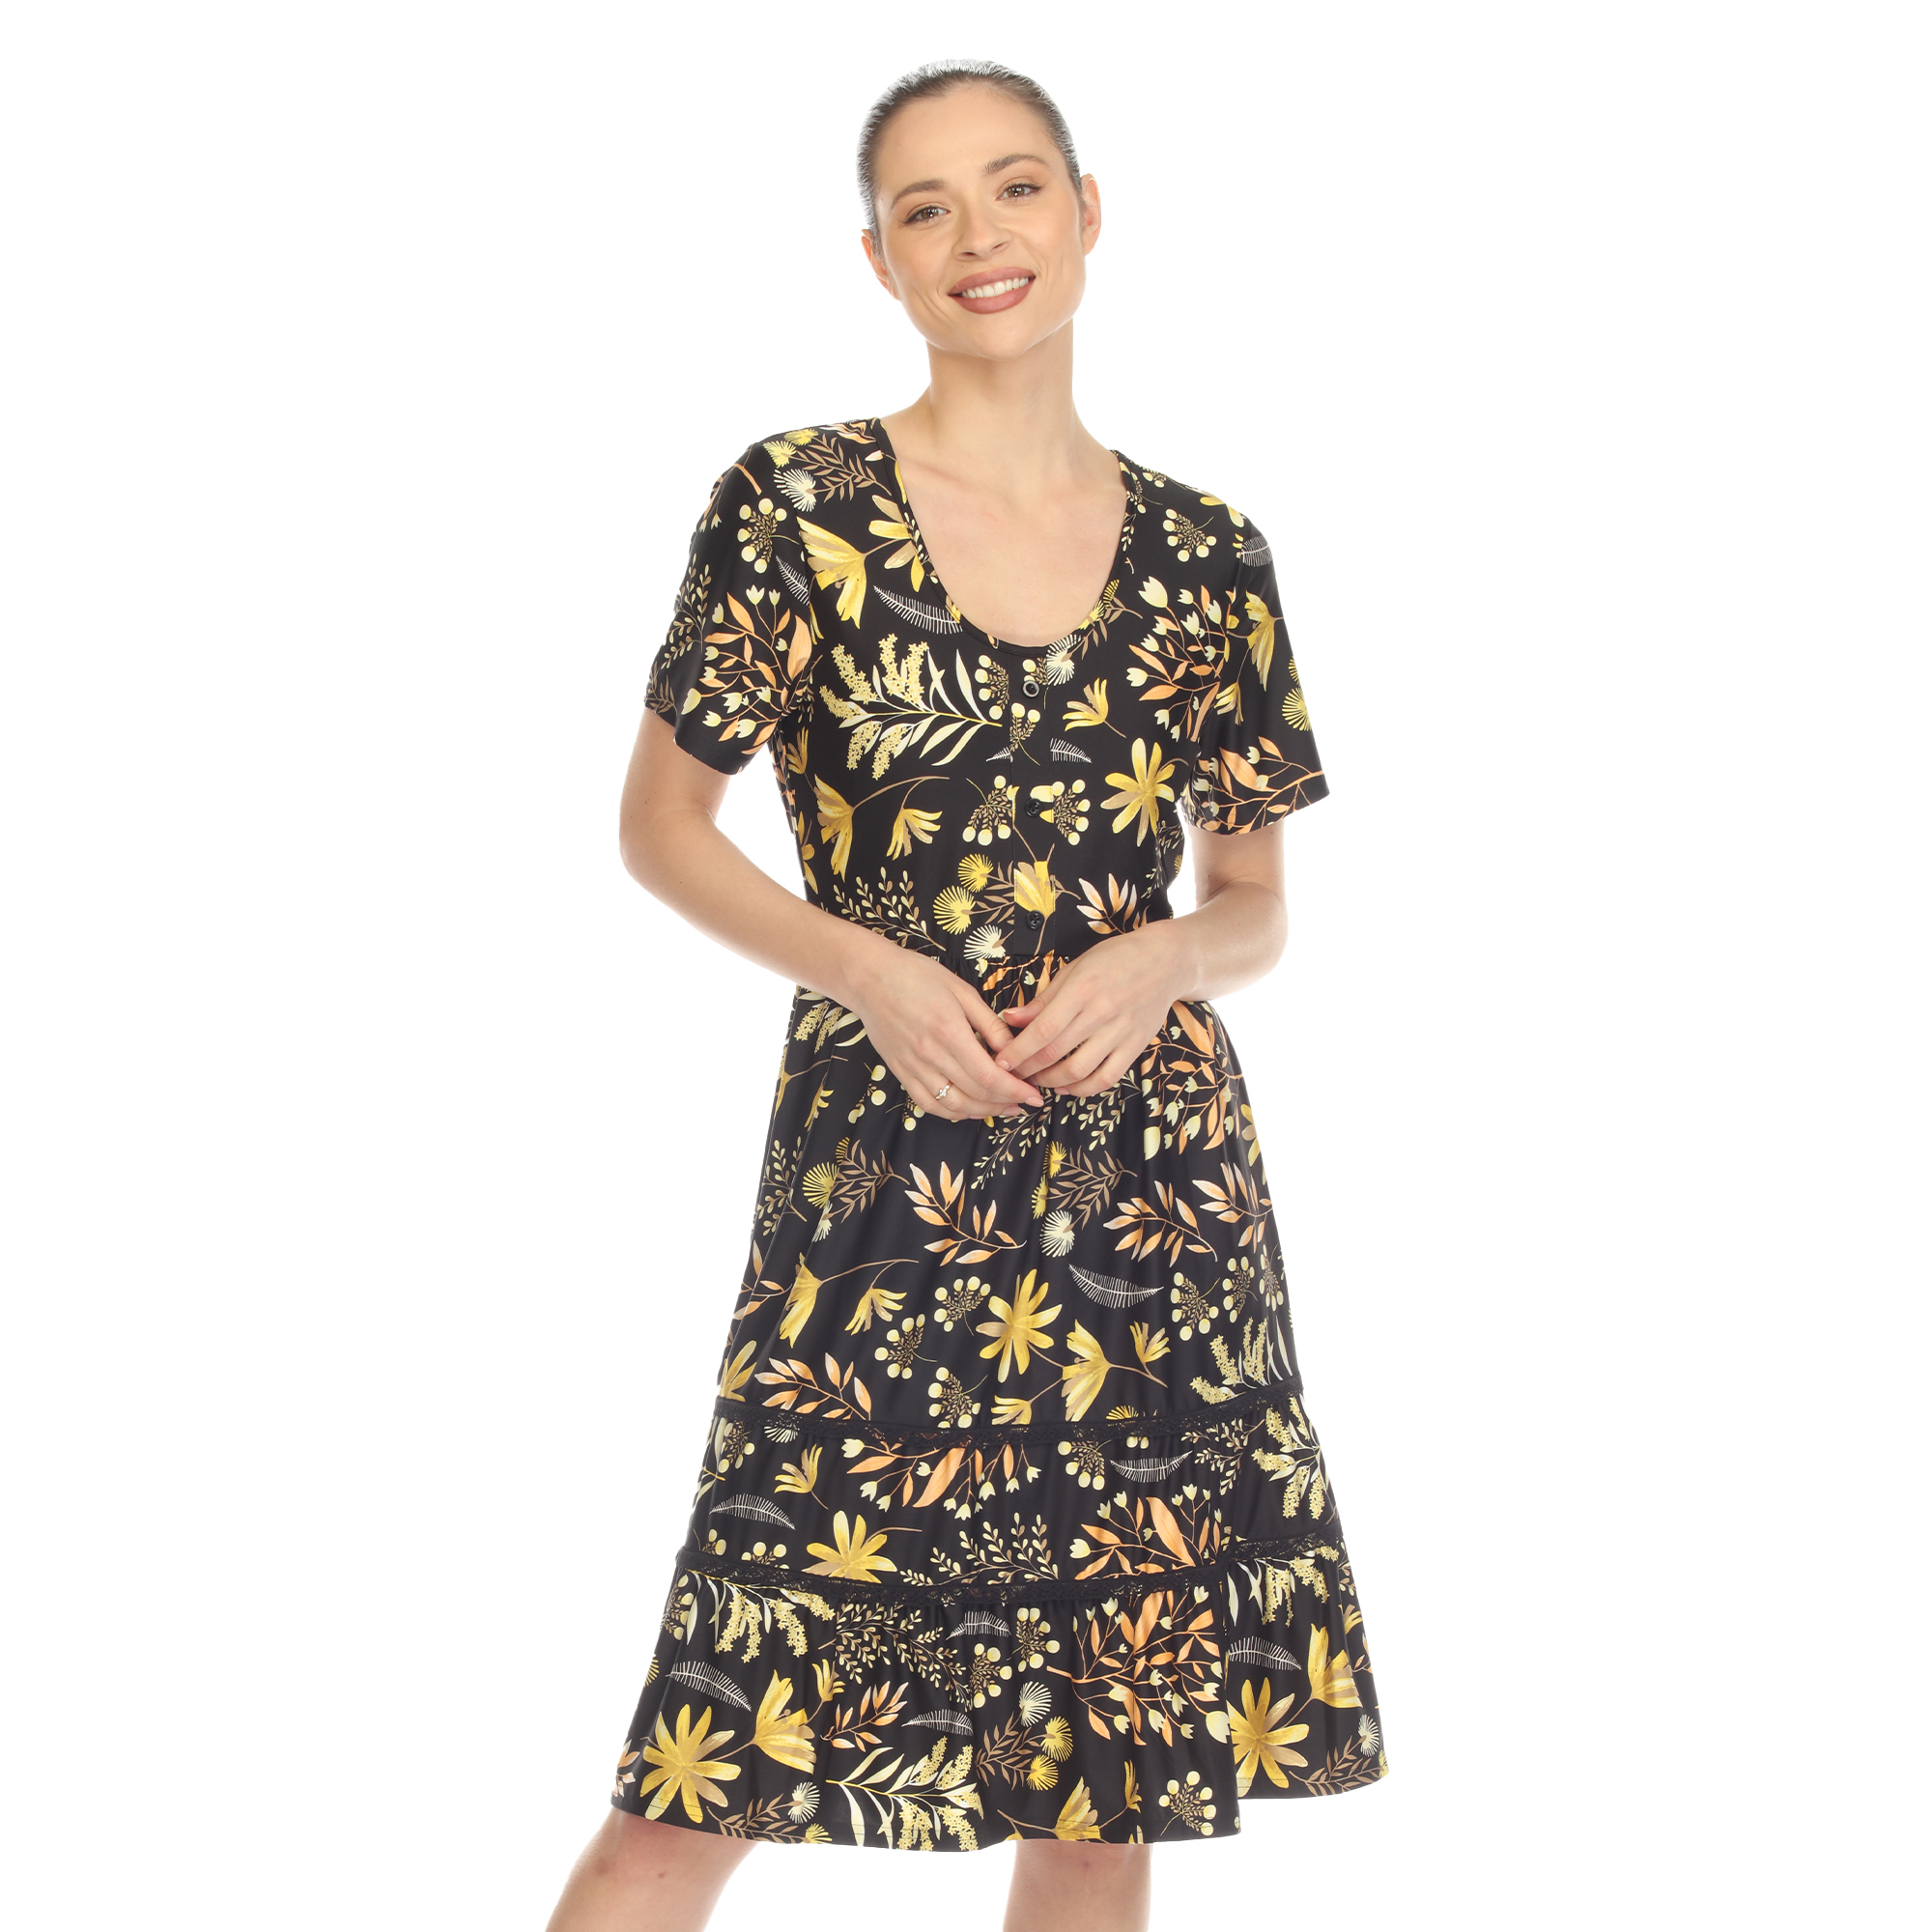 White Mark Women's Floral Short Sleeve Knee Length Tiered Dress - Black, Small